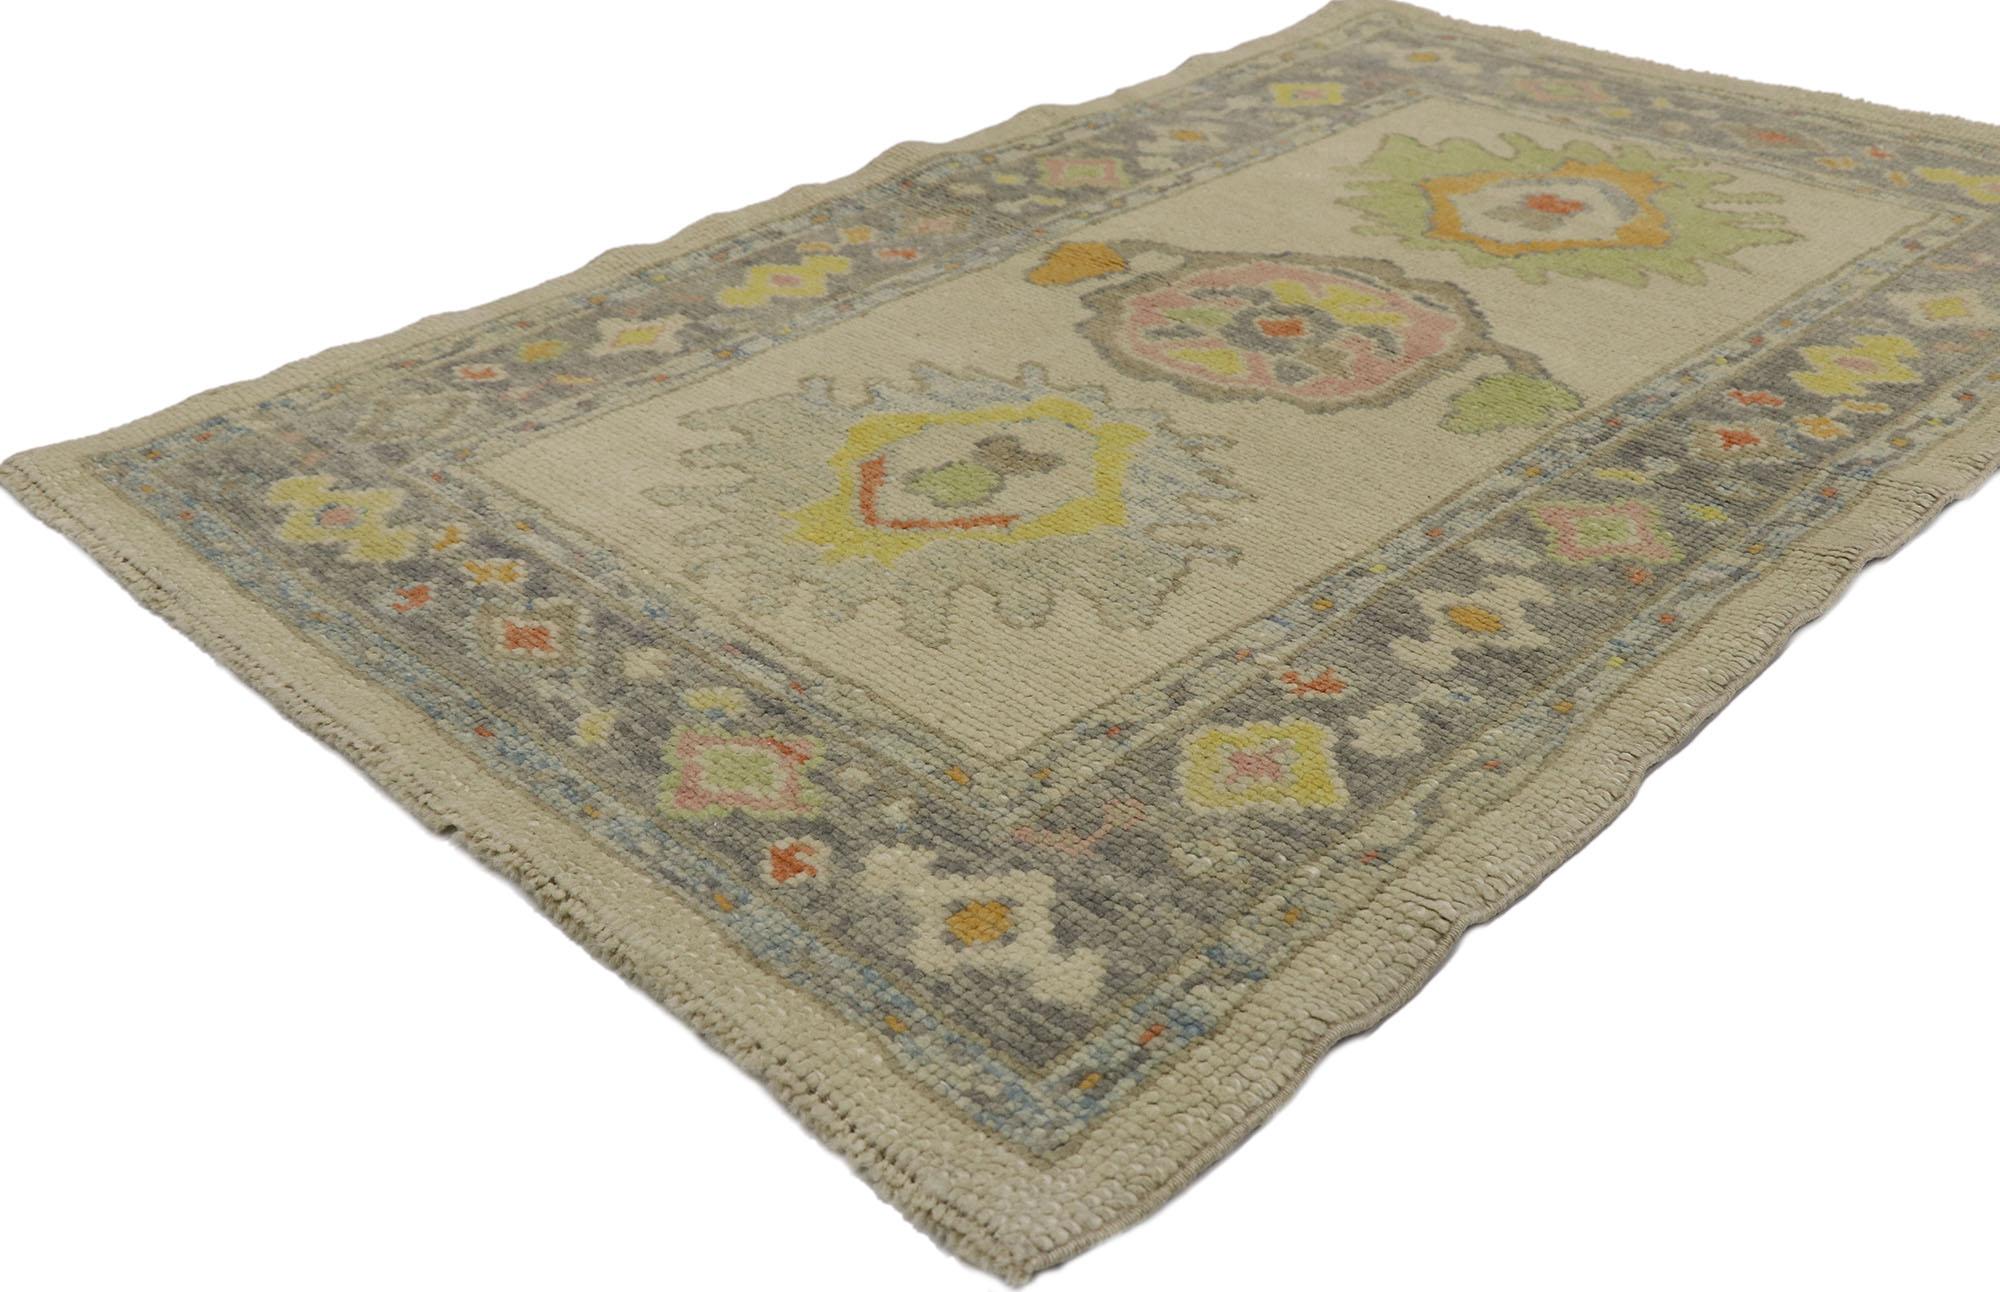 53595 new contemporary Turkish Oushak rug with Modern style 03'00 x 04'10. Polished and playful, this hand-knotted wool small Turkish Oushak rug beautifully embodies a modern style. The abrashed oatmeal colored field features three colorful